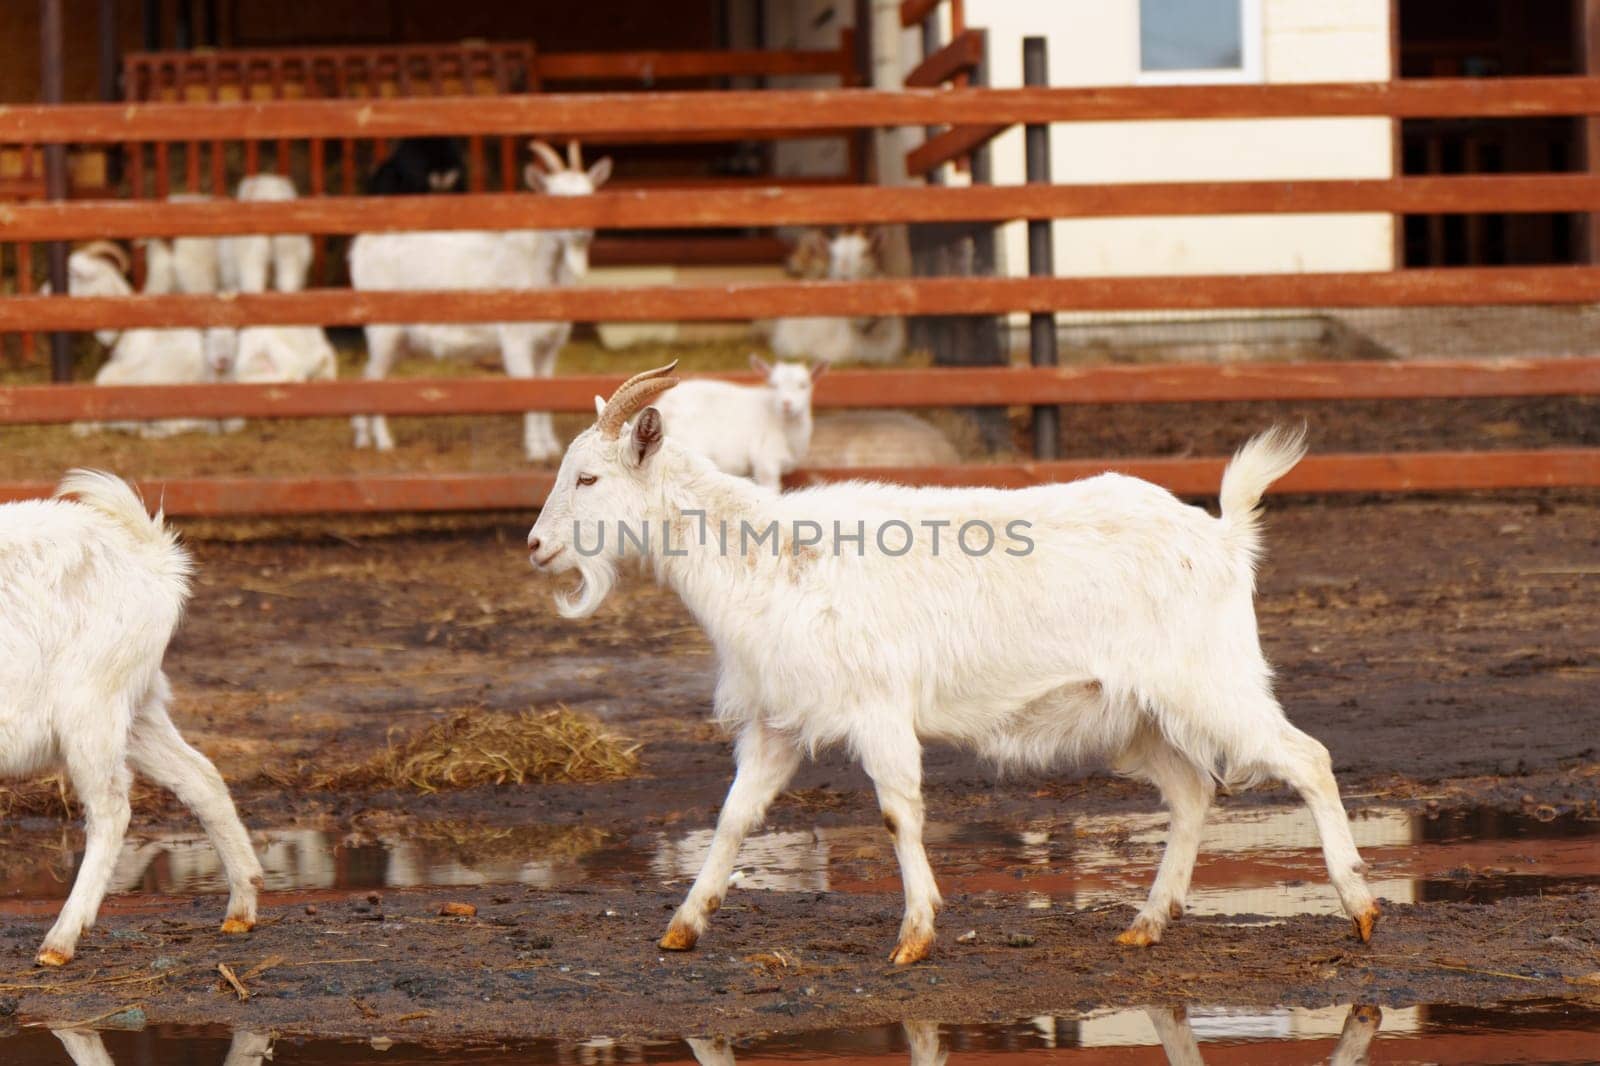 Goat on a farm, showcasing a typical scene in agriculture.